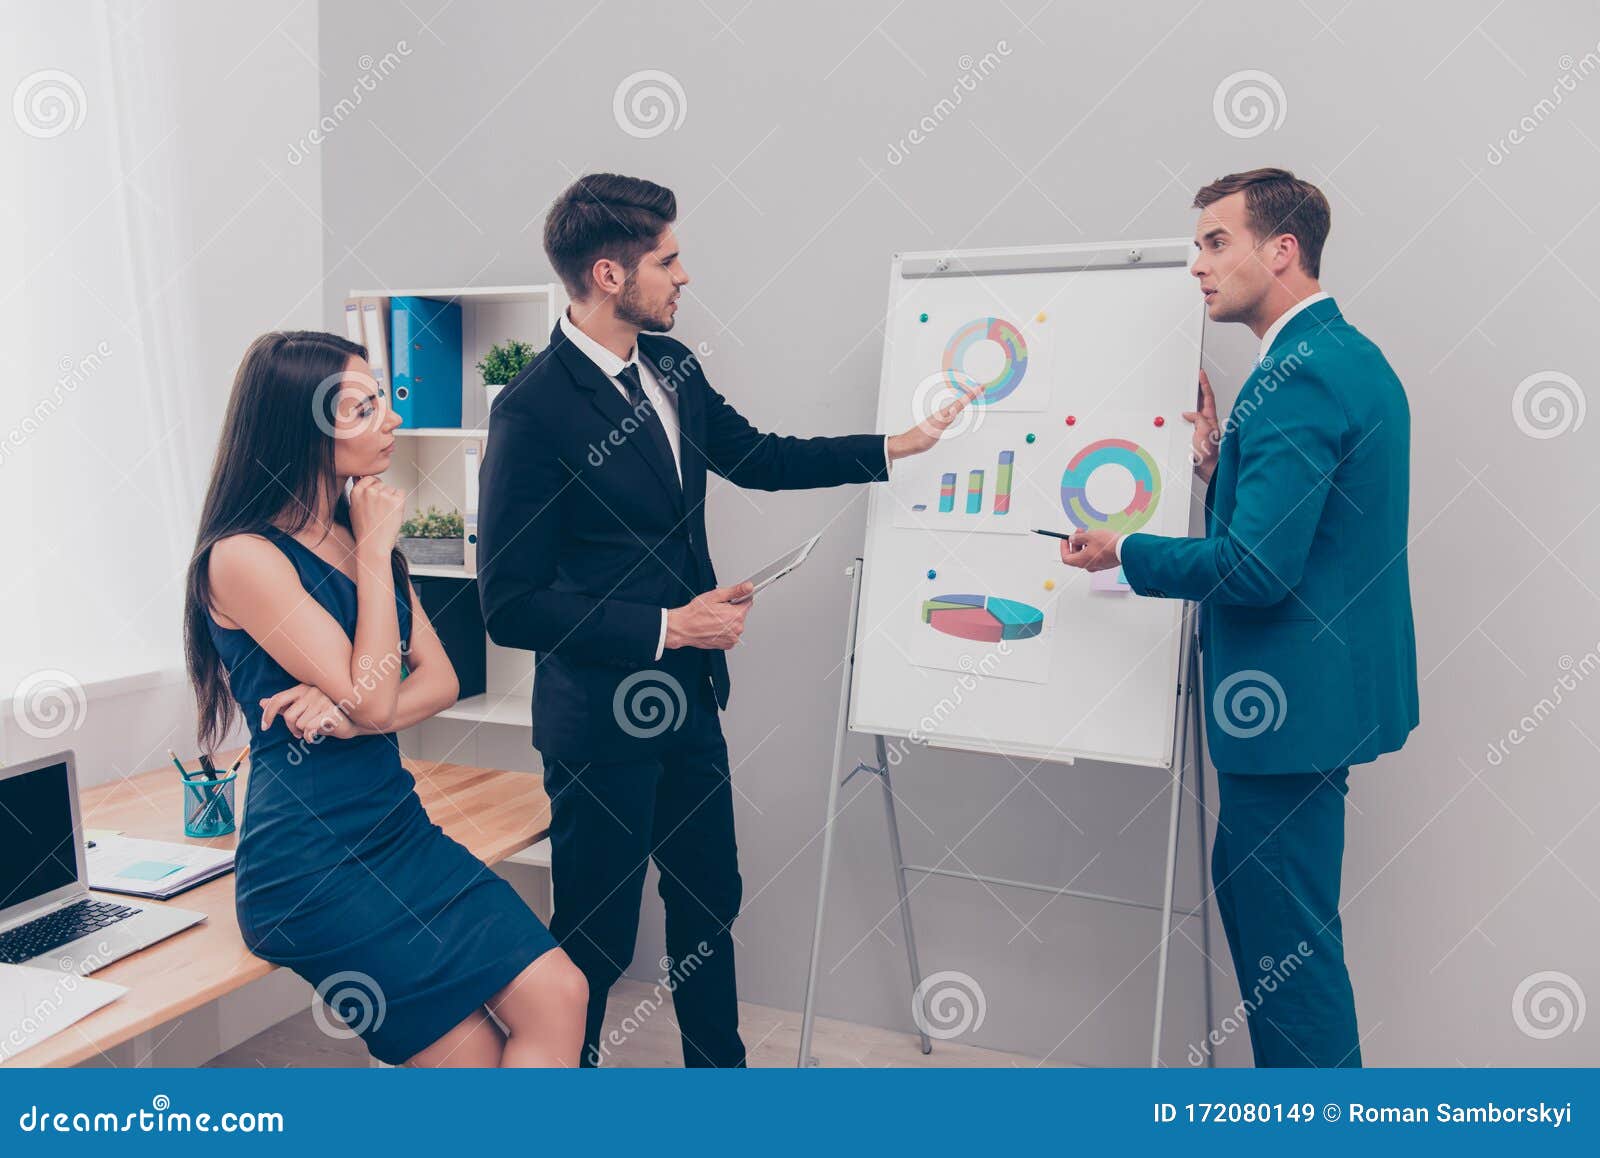 young man showing diagrama on flipchart to his colleagues